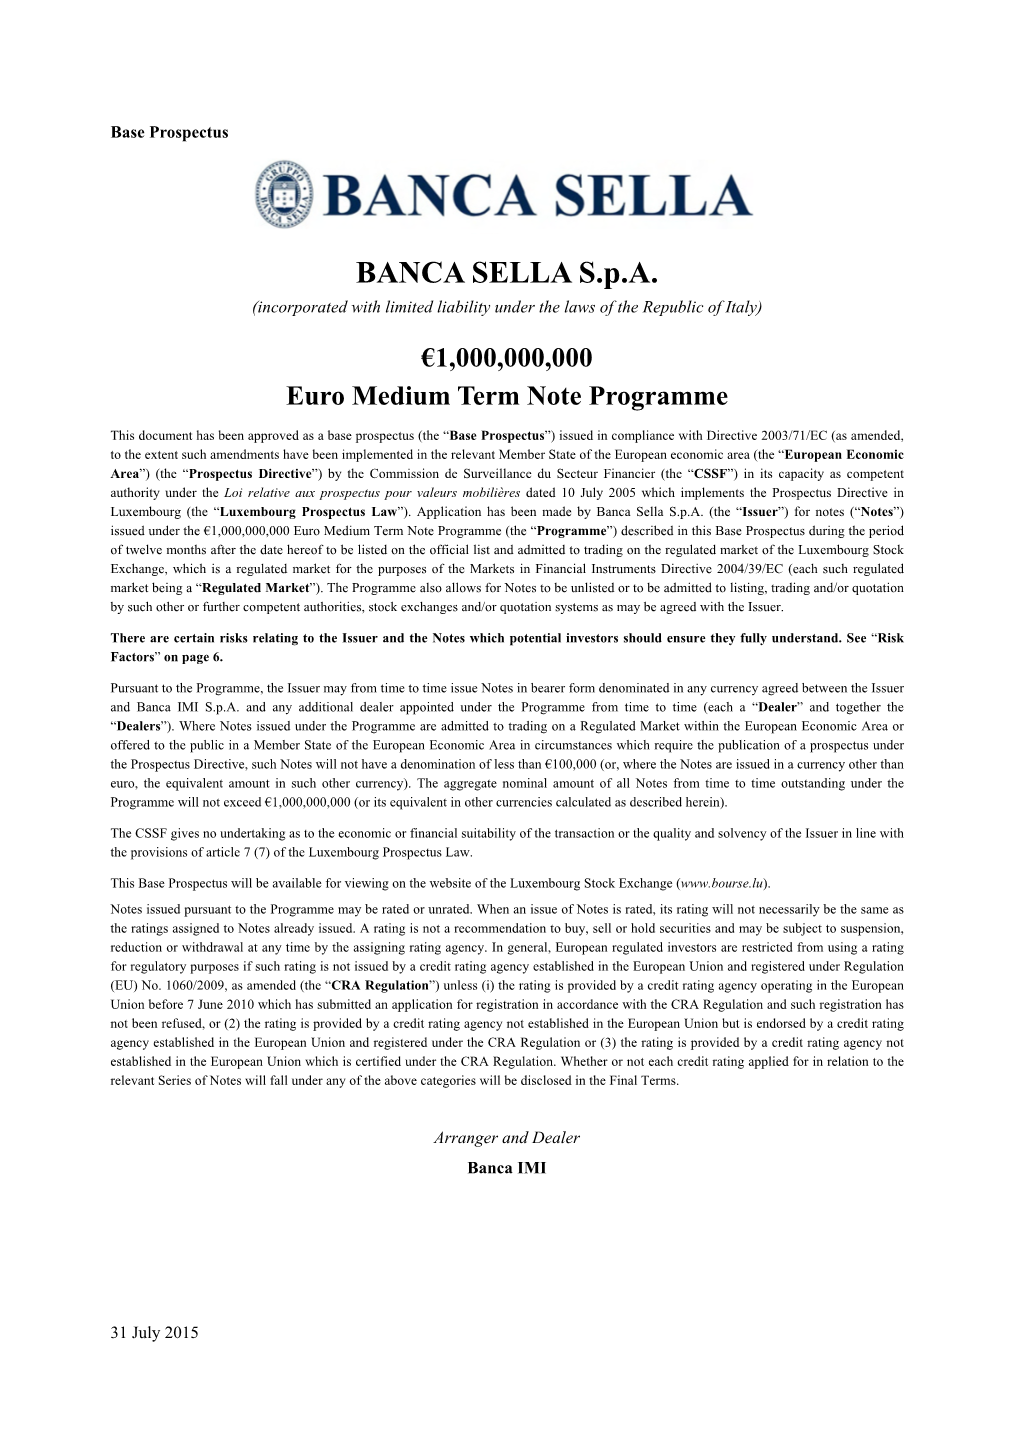 BANCA SELLA S.P.A. (Incorporated with Limited Liability Under the Laws of the Republic of Italy)